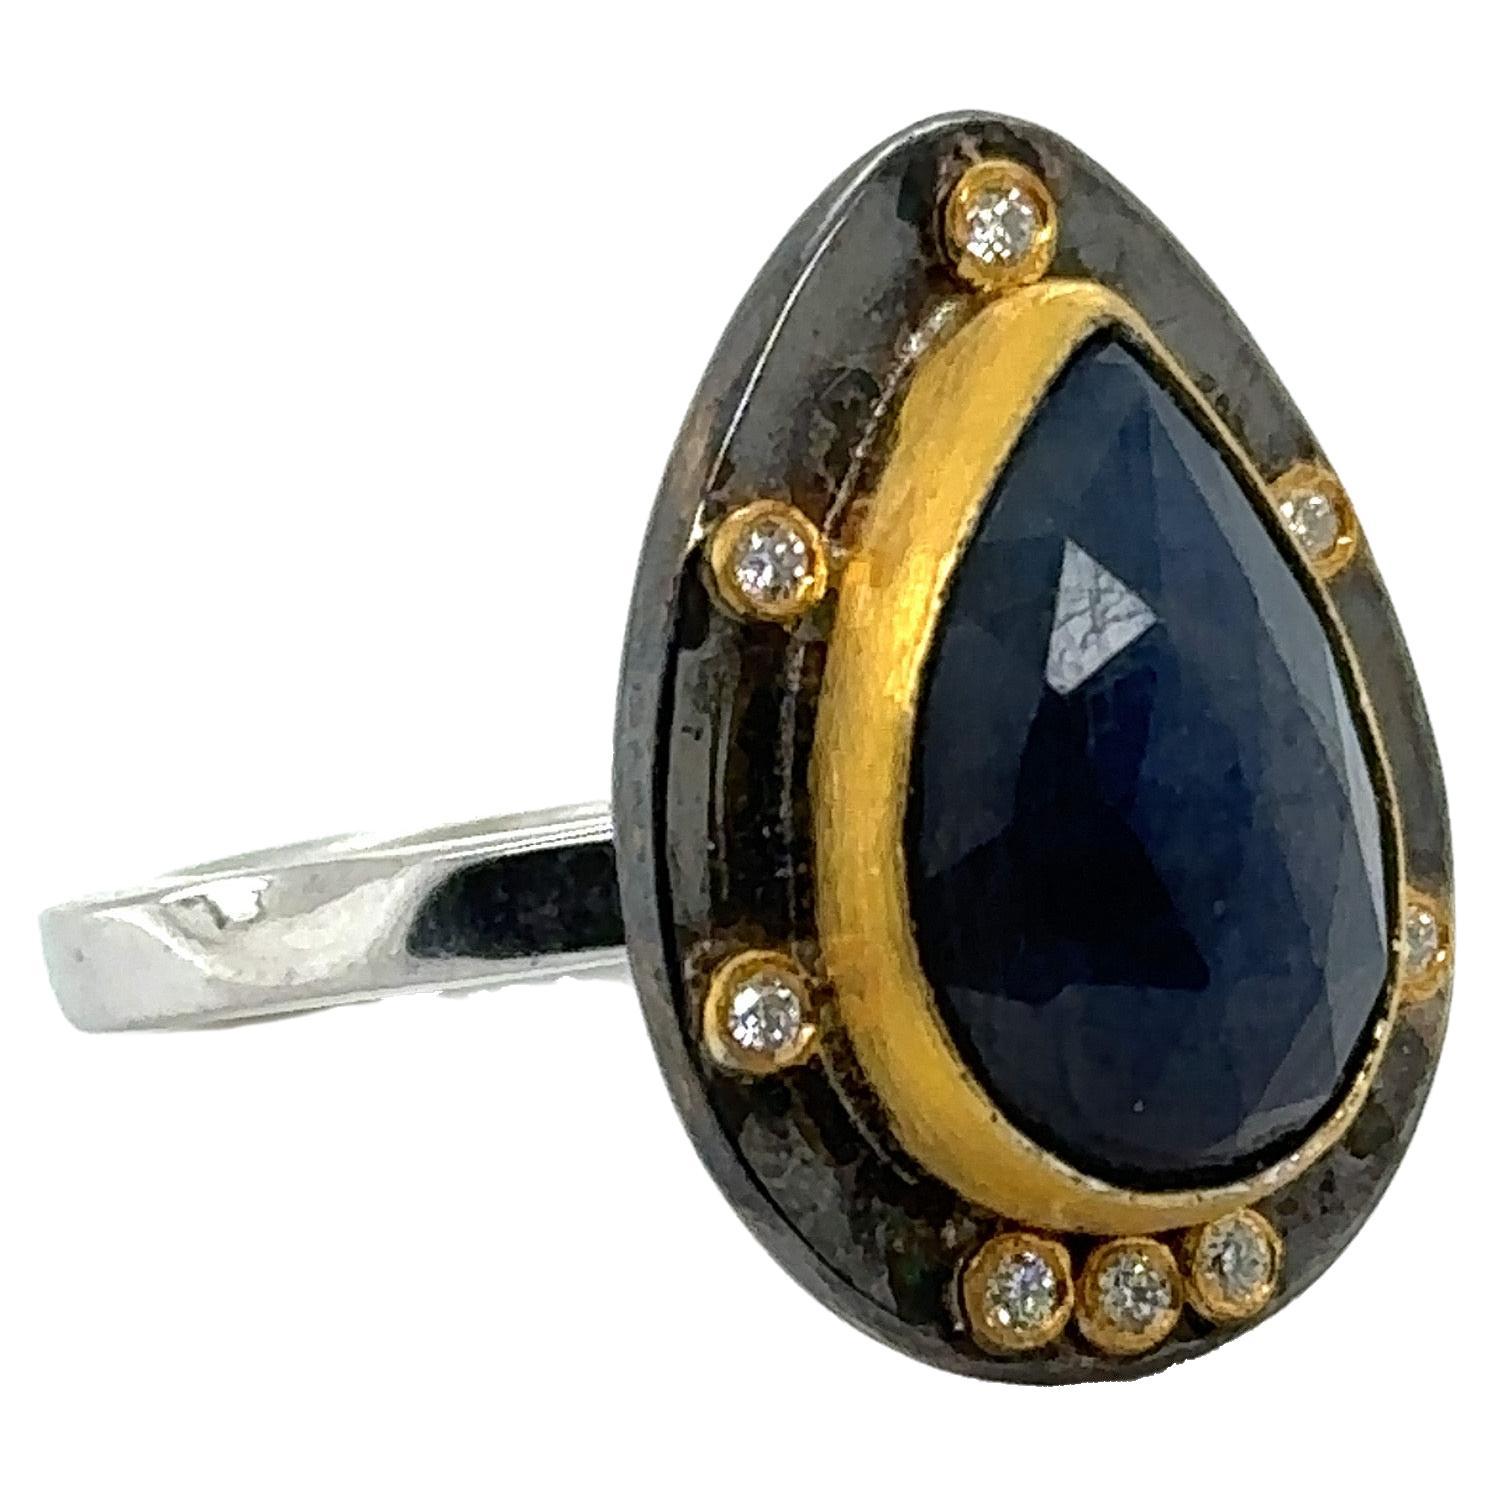 JAS-19-1804 - 24K GOLD/STERLING SILVER RING with 6.00 CT PEAR SHAPE SAPPHIRE